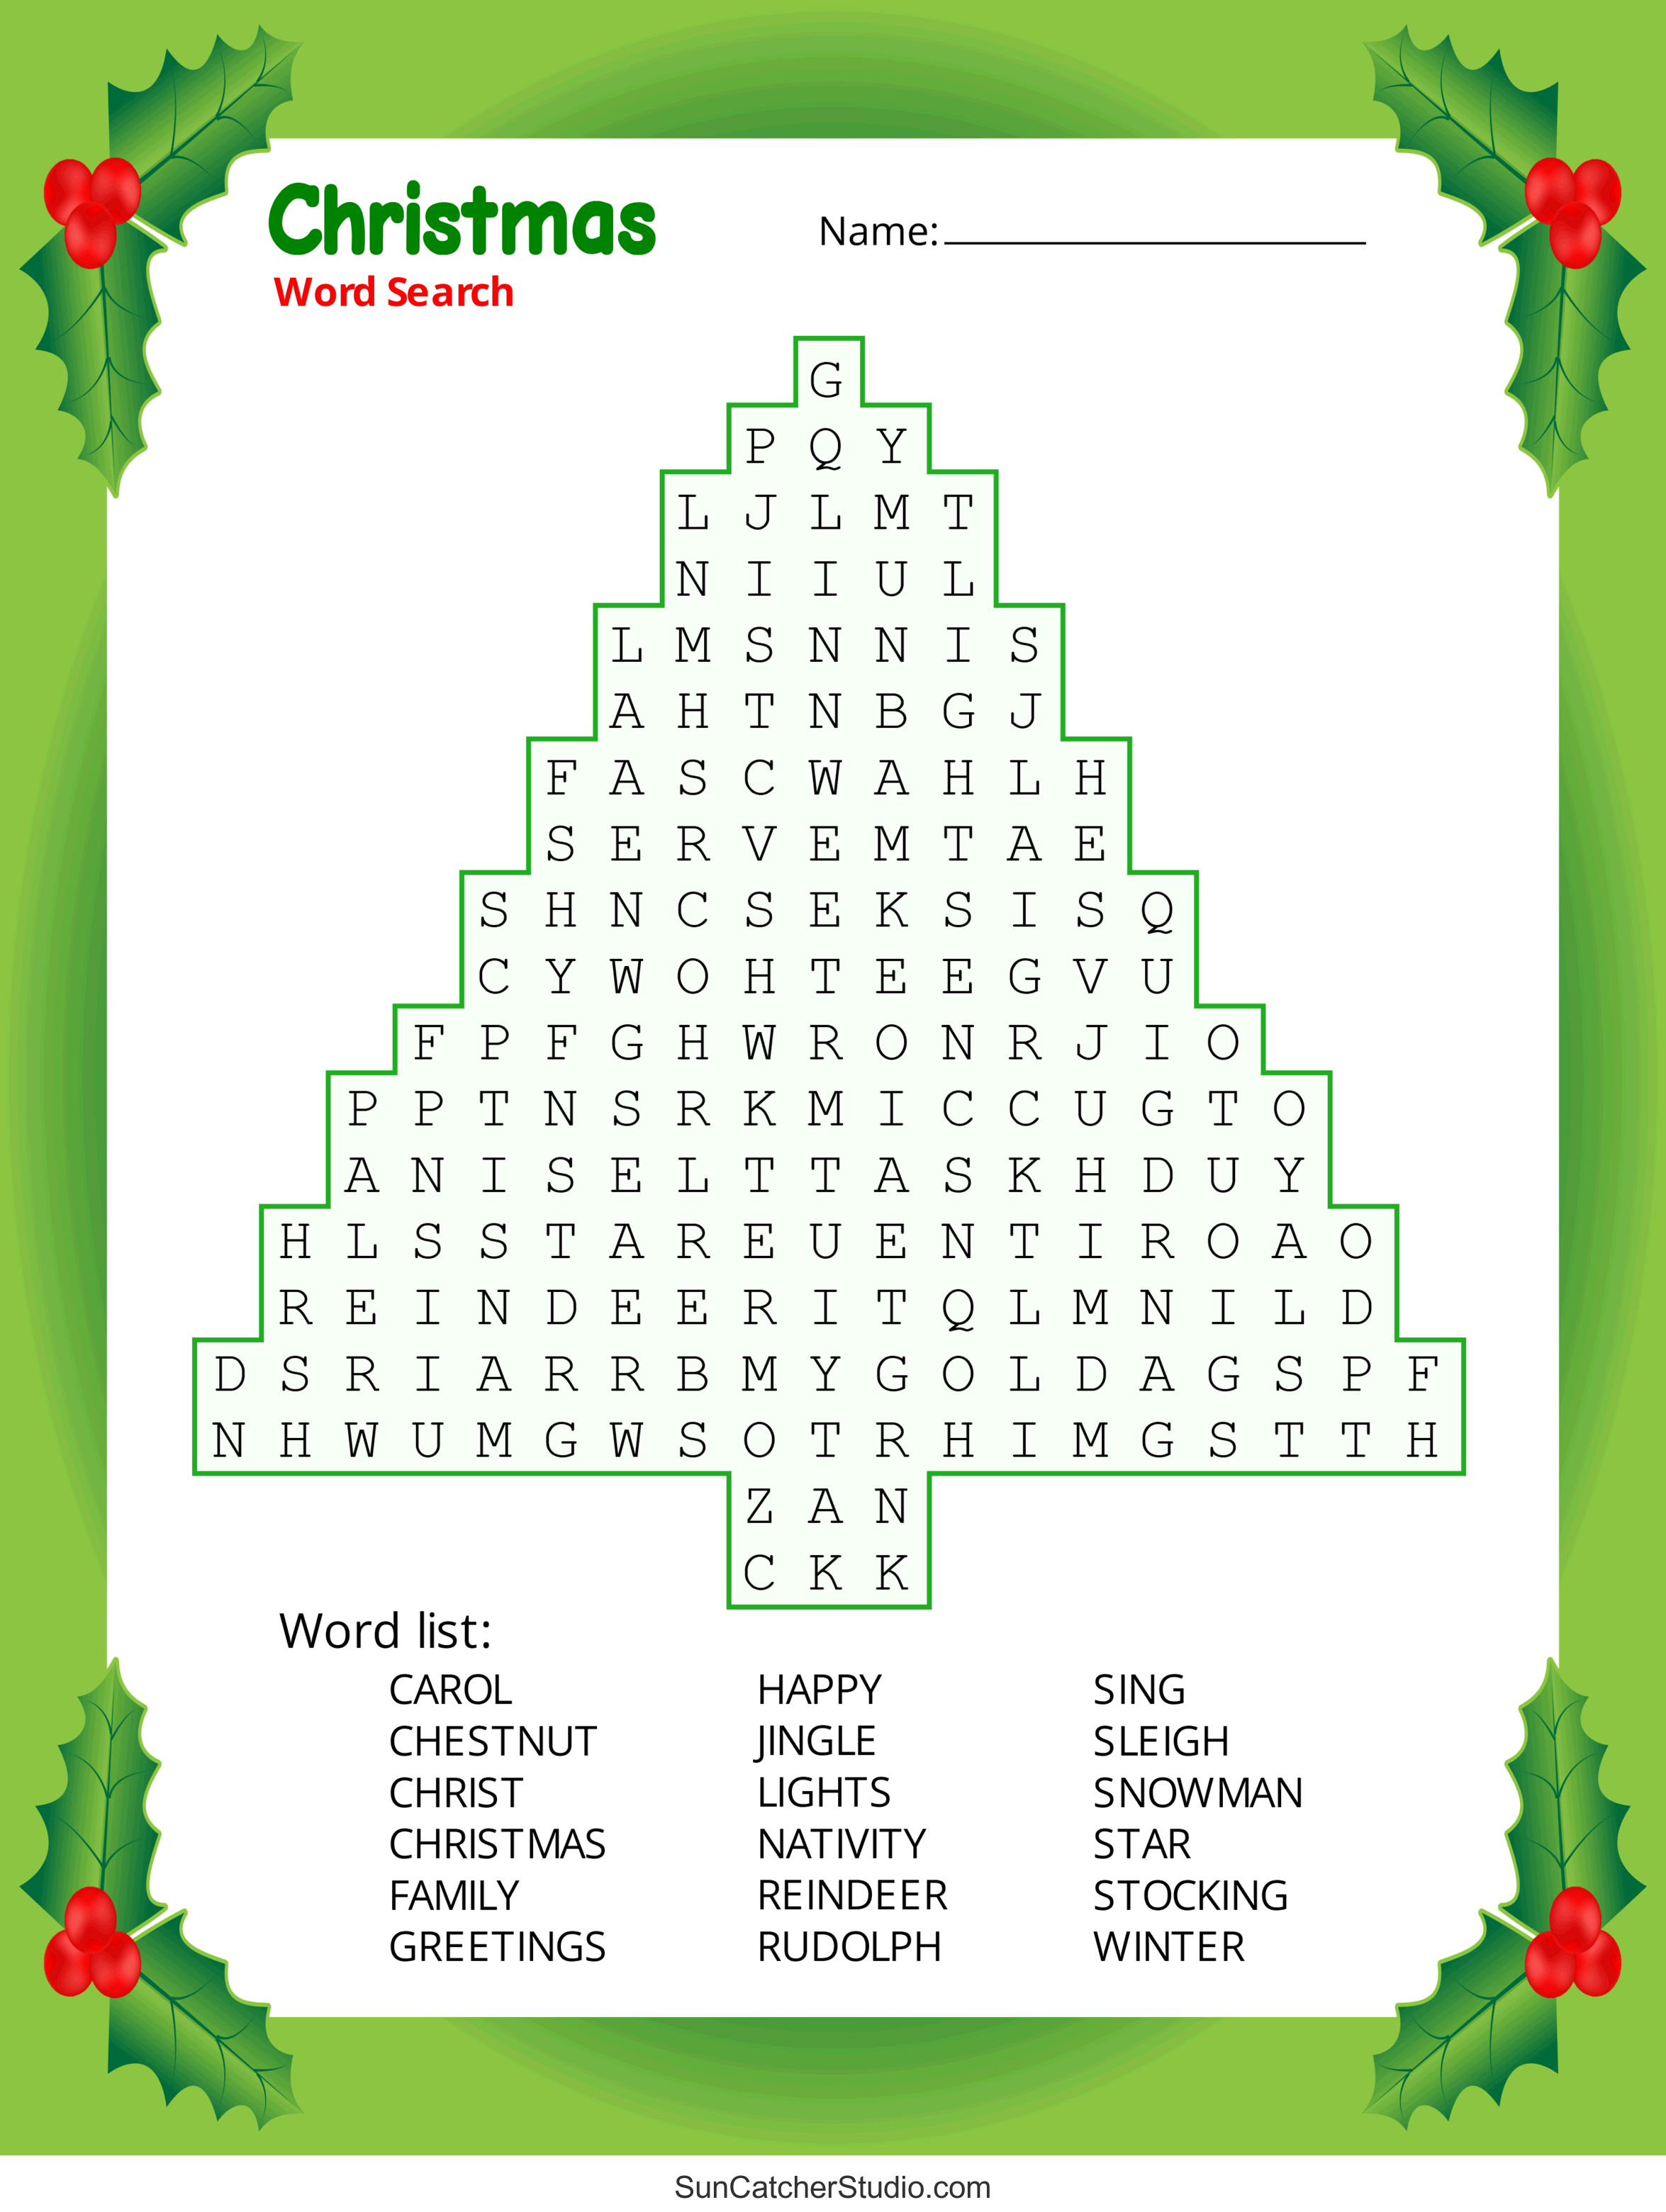 Christmas Word Search Free Printable PDF Puzzles DIY Projects 